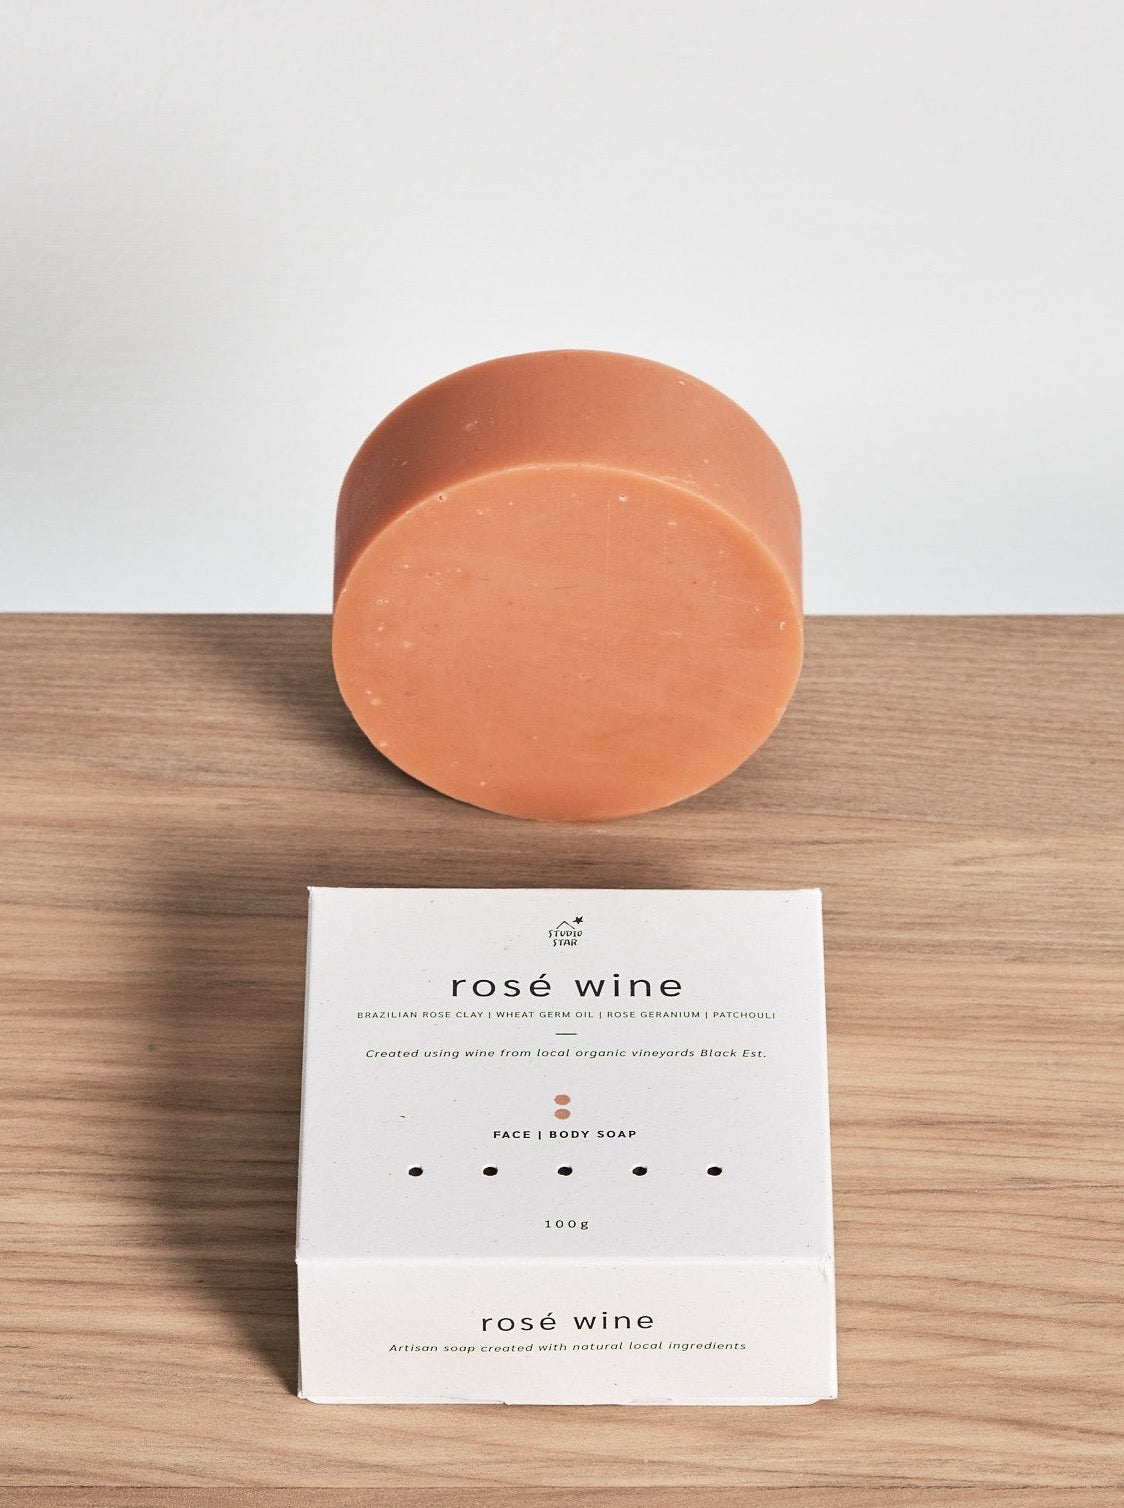 Studio Star's Rosé Wine Soap on a wooden table.